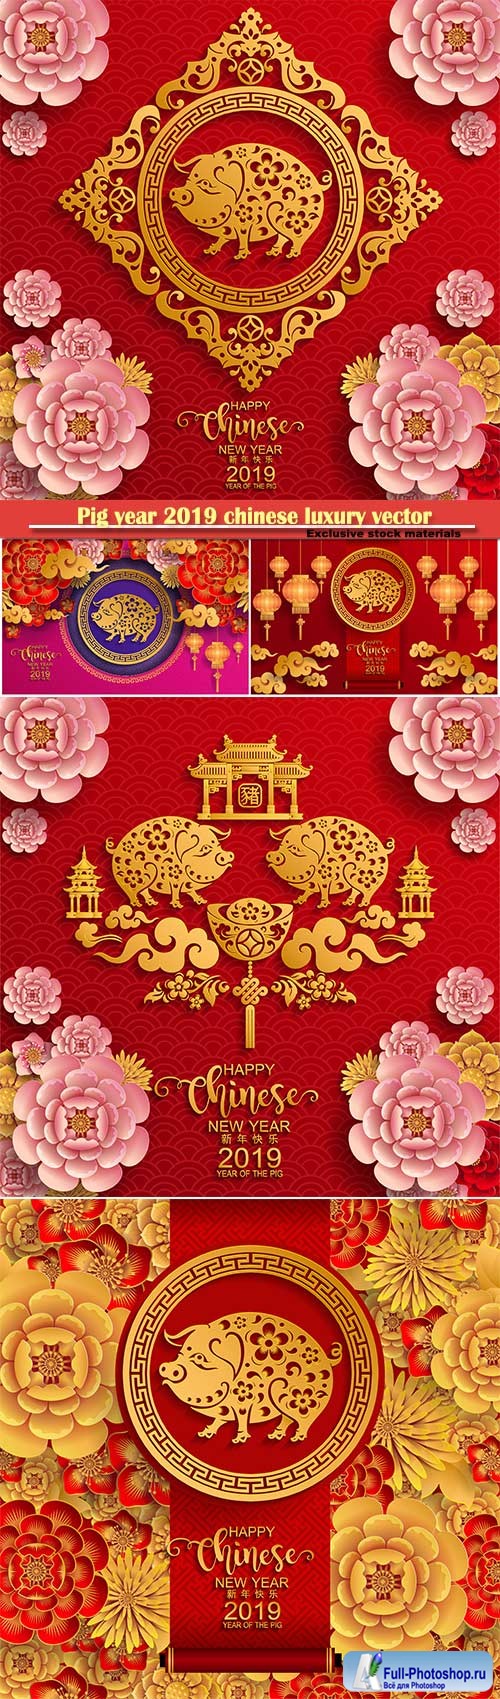 Pig year 2019 chinese luxury vector card # 5